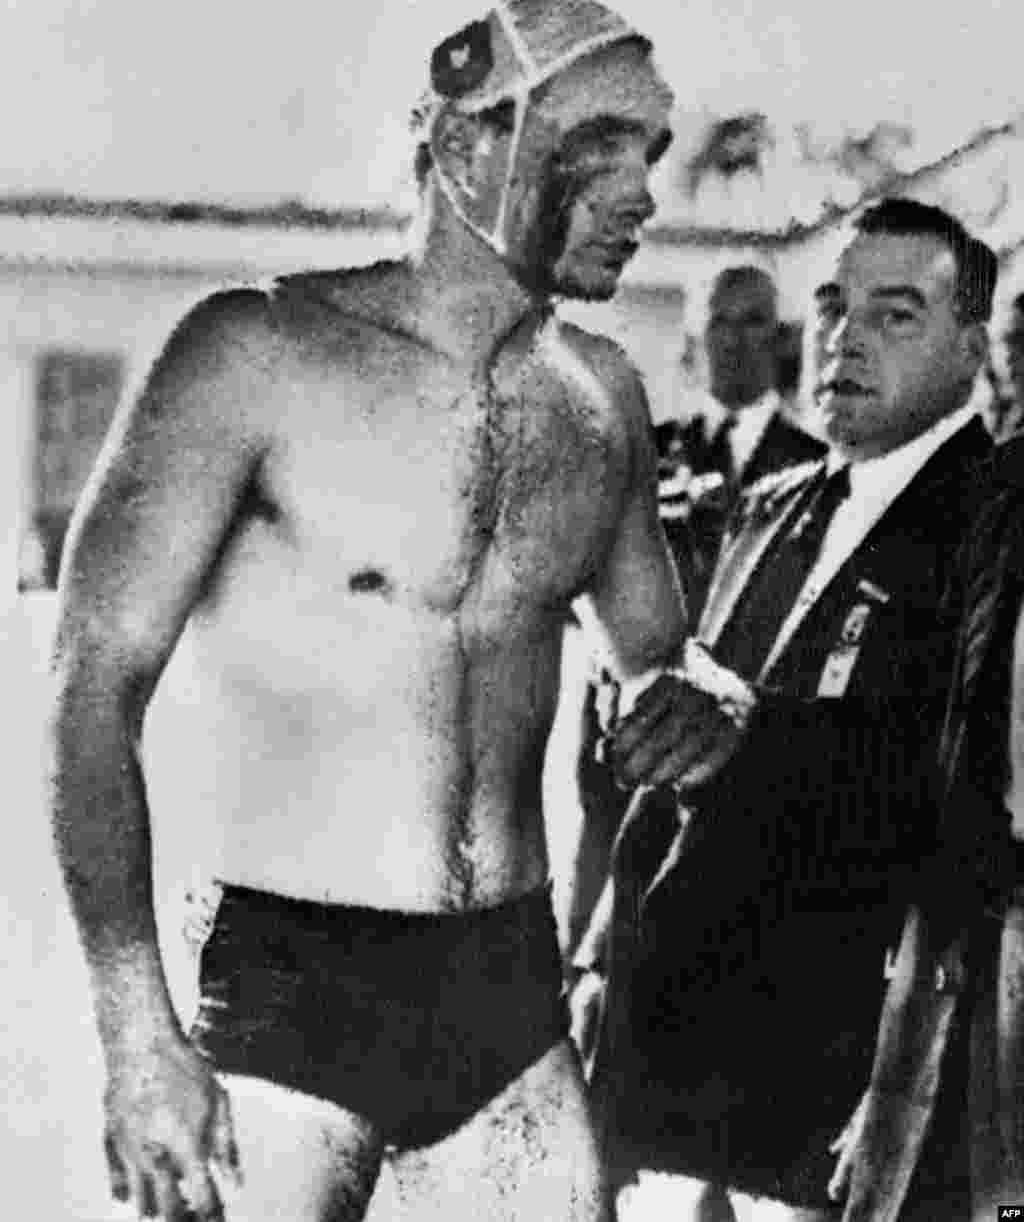 Hungarian water-polo player Ervin Zador after the infamous semifinal against the U.S.S.R. at the Melbourne Olympics in 1956 (just after the Soviet invasion of Hungary). The Hungarians won the bad-tempered match and went on to clinch the gold medal.